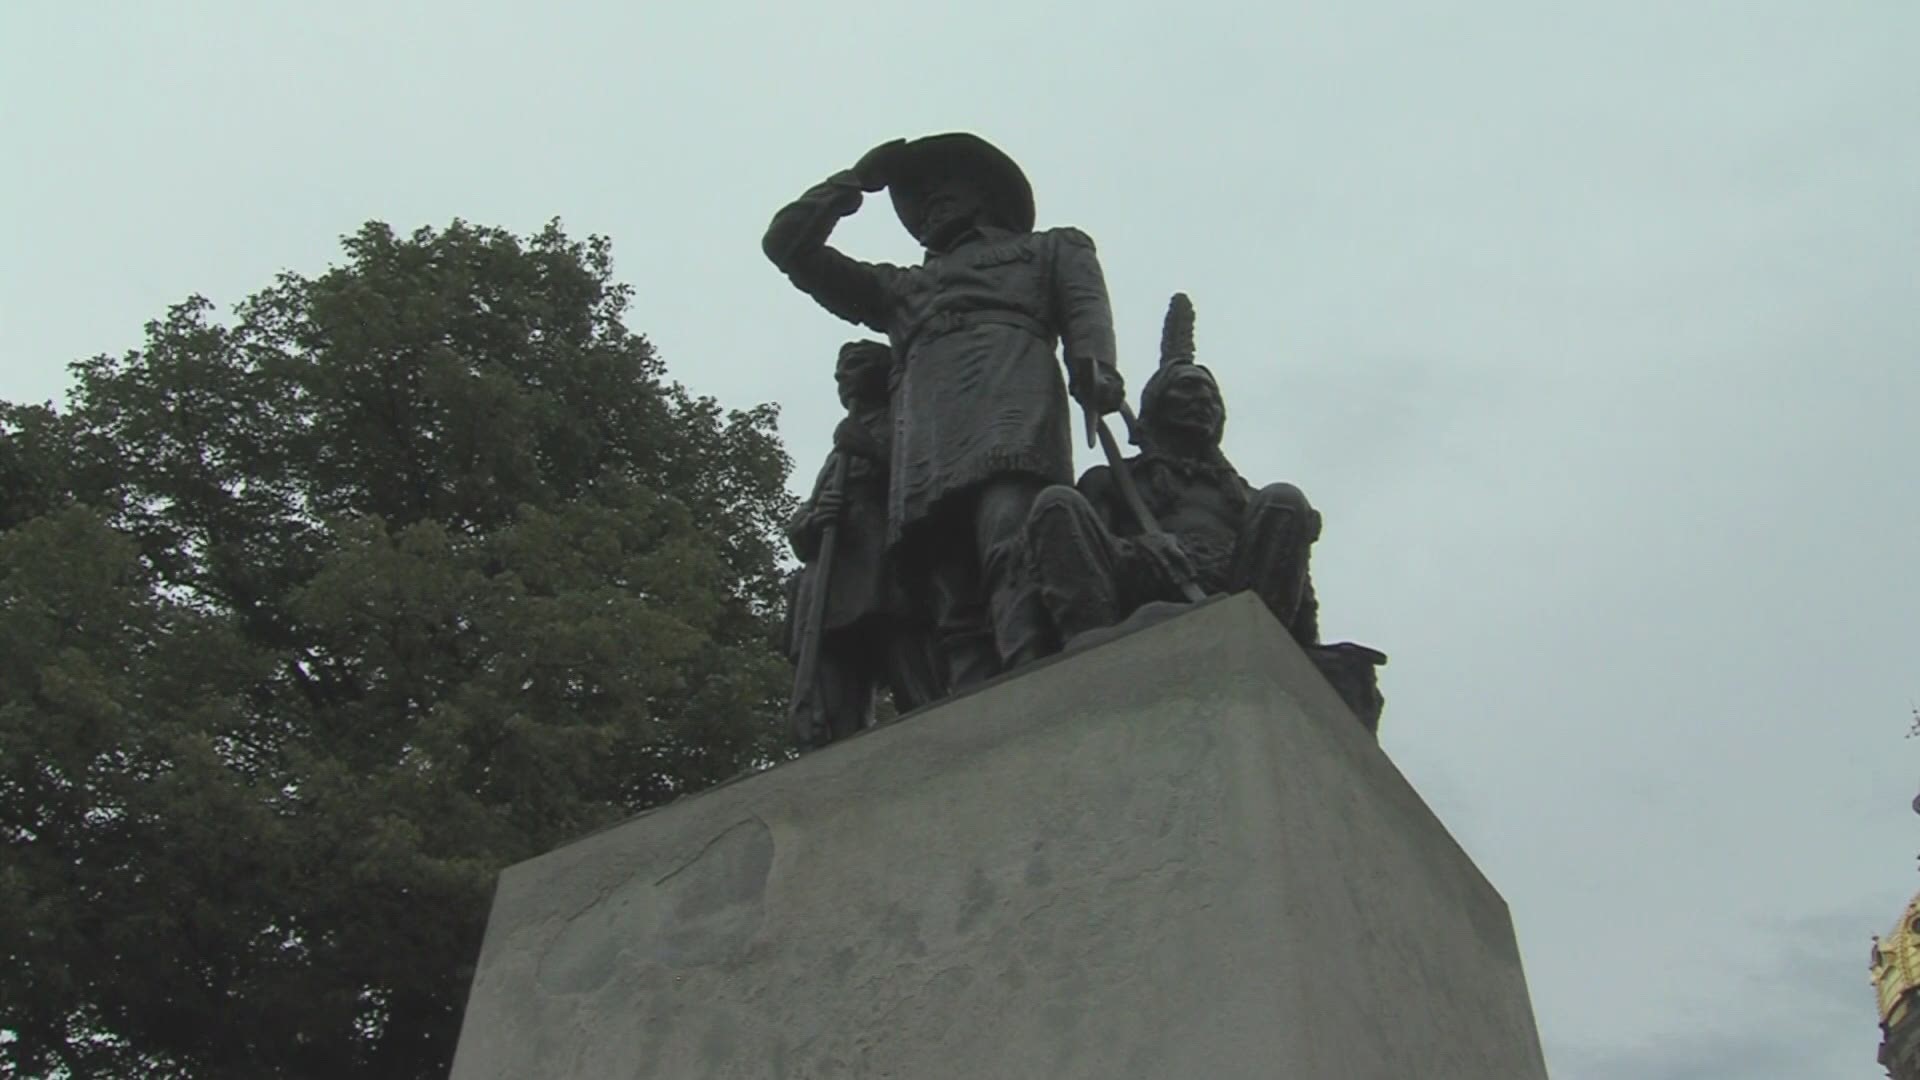 Call for tearing down statues has come to Iowa